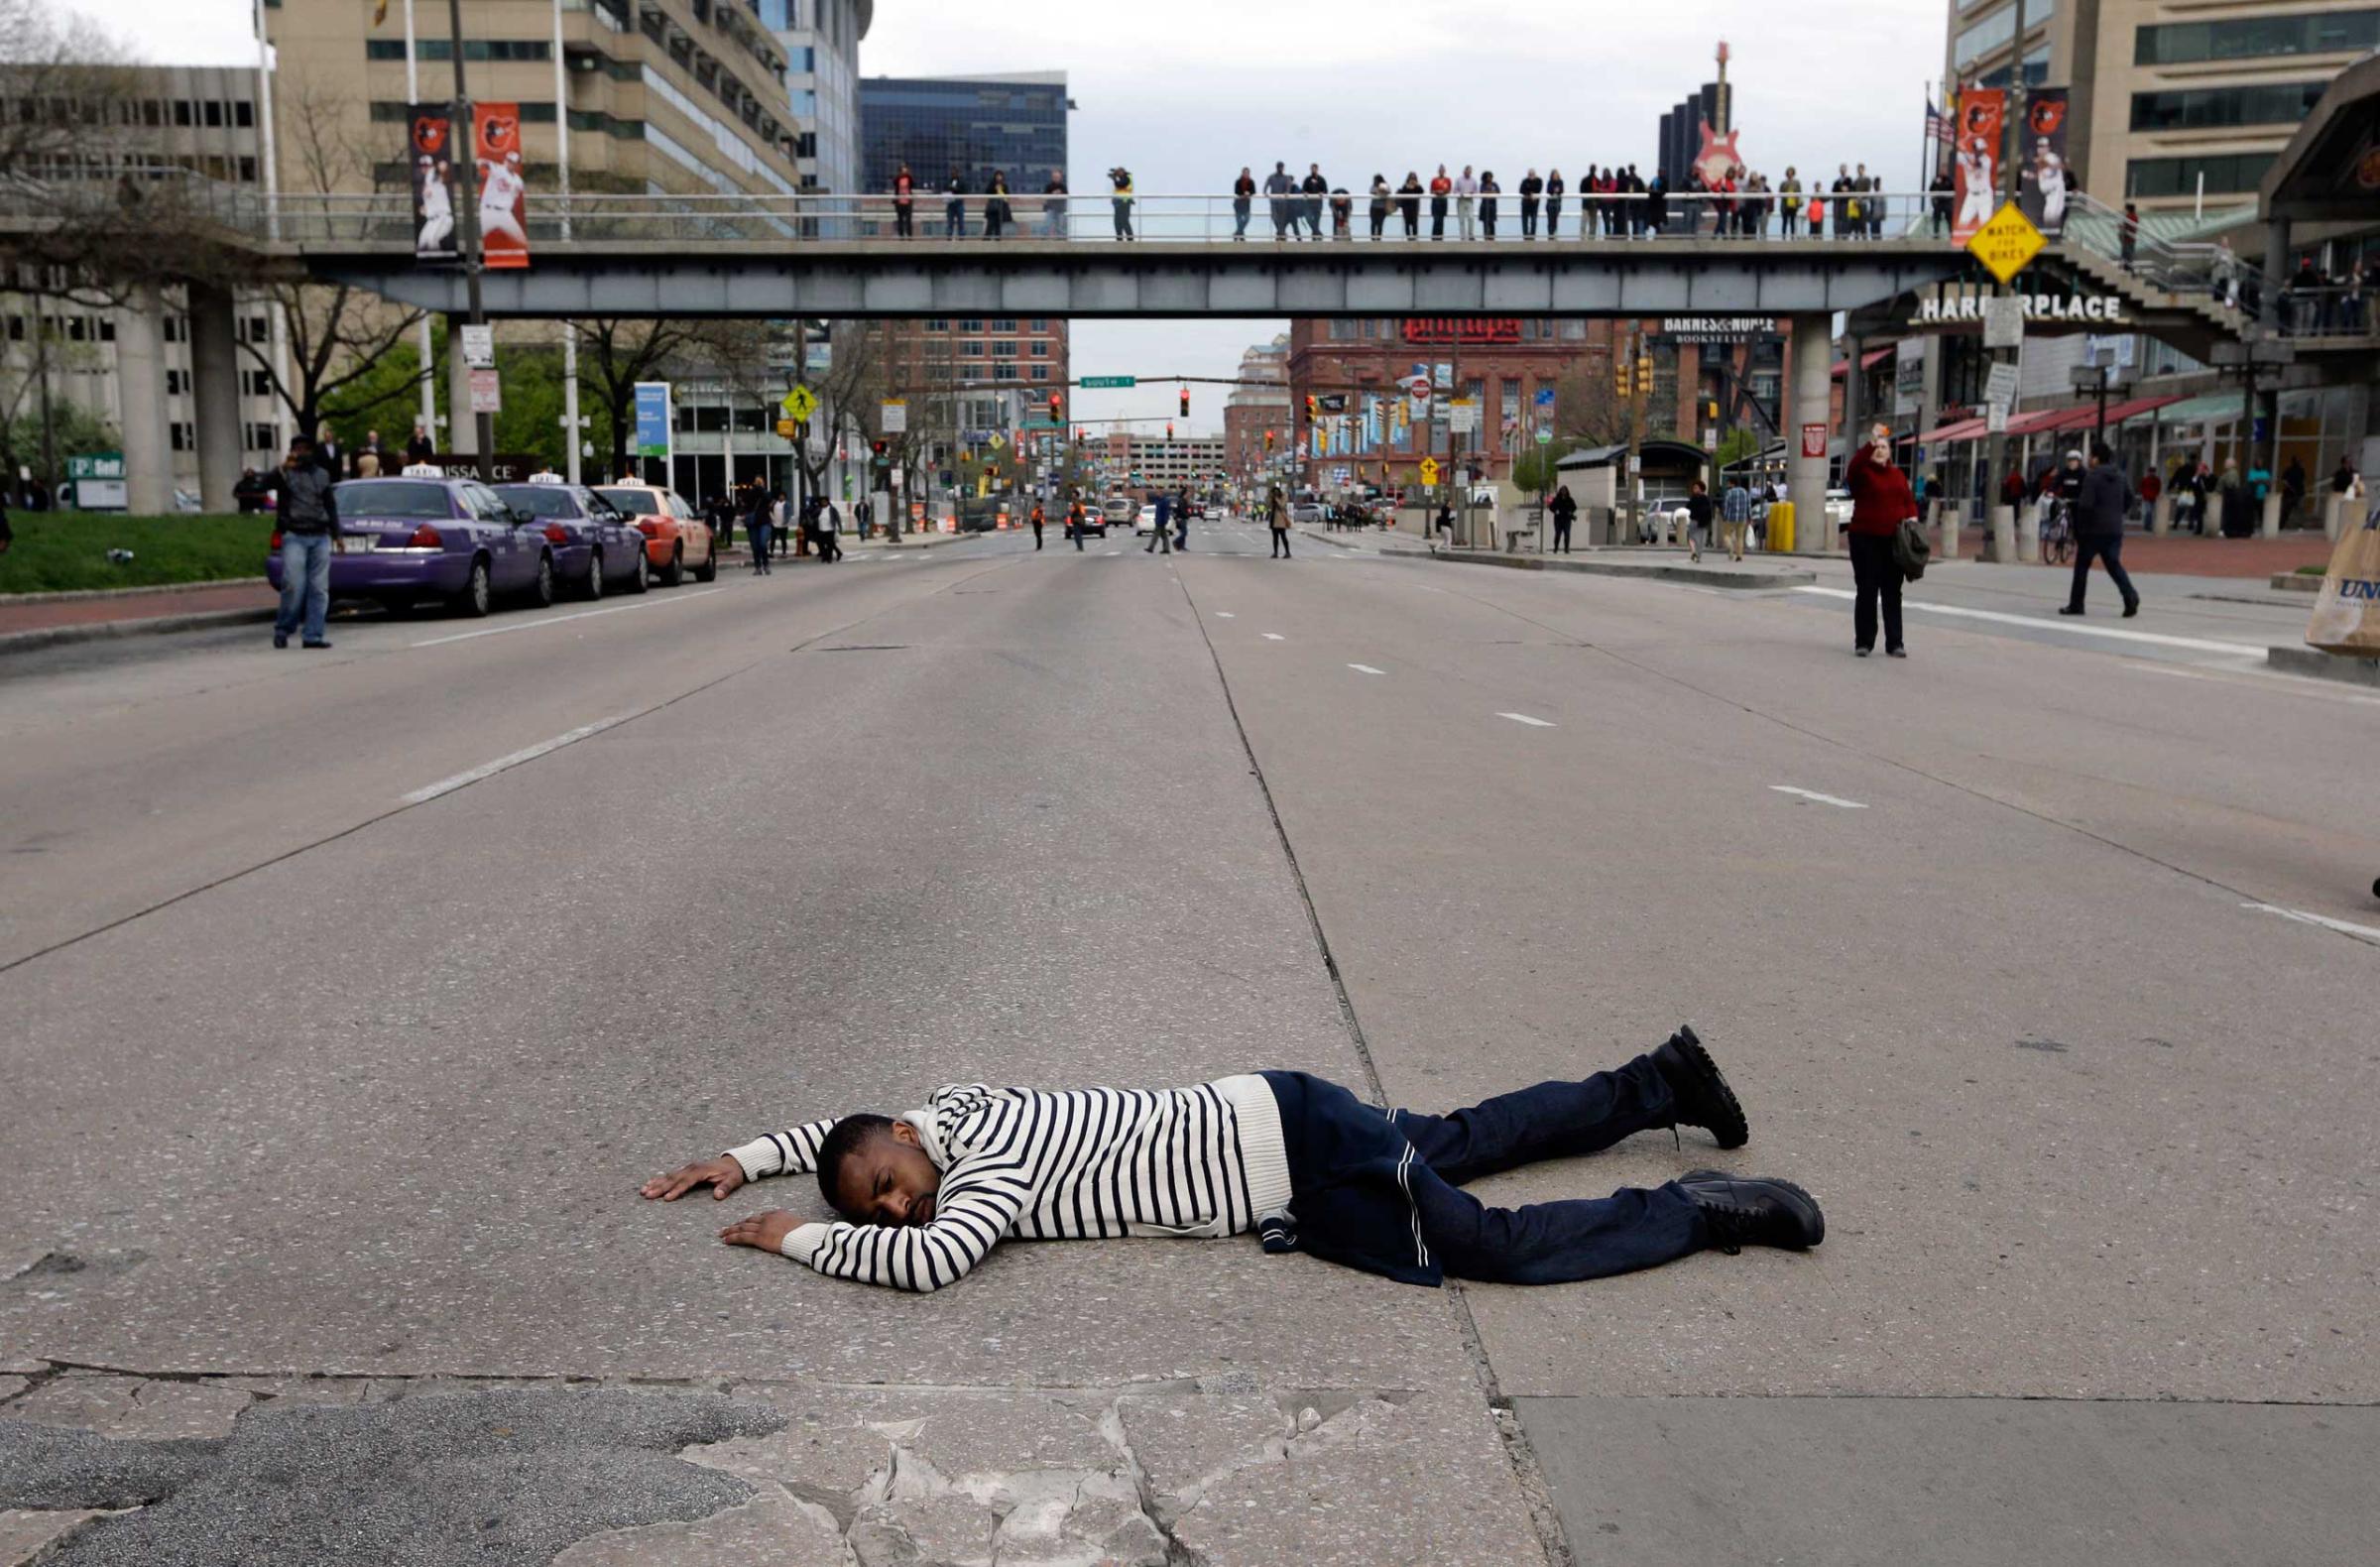 A protestor lays in the middle of a street during a march for Freddie Gray in Baltimore on April 25, 2015.